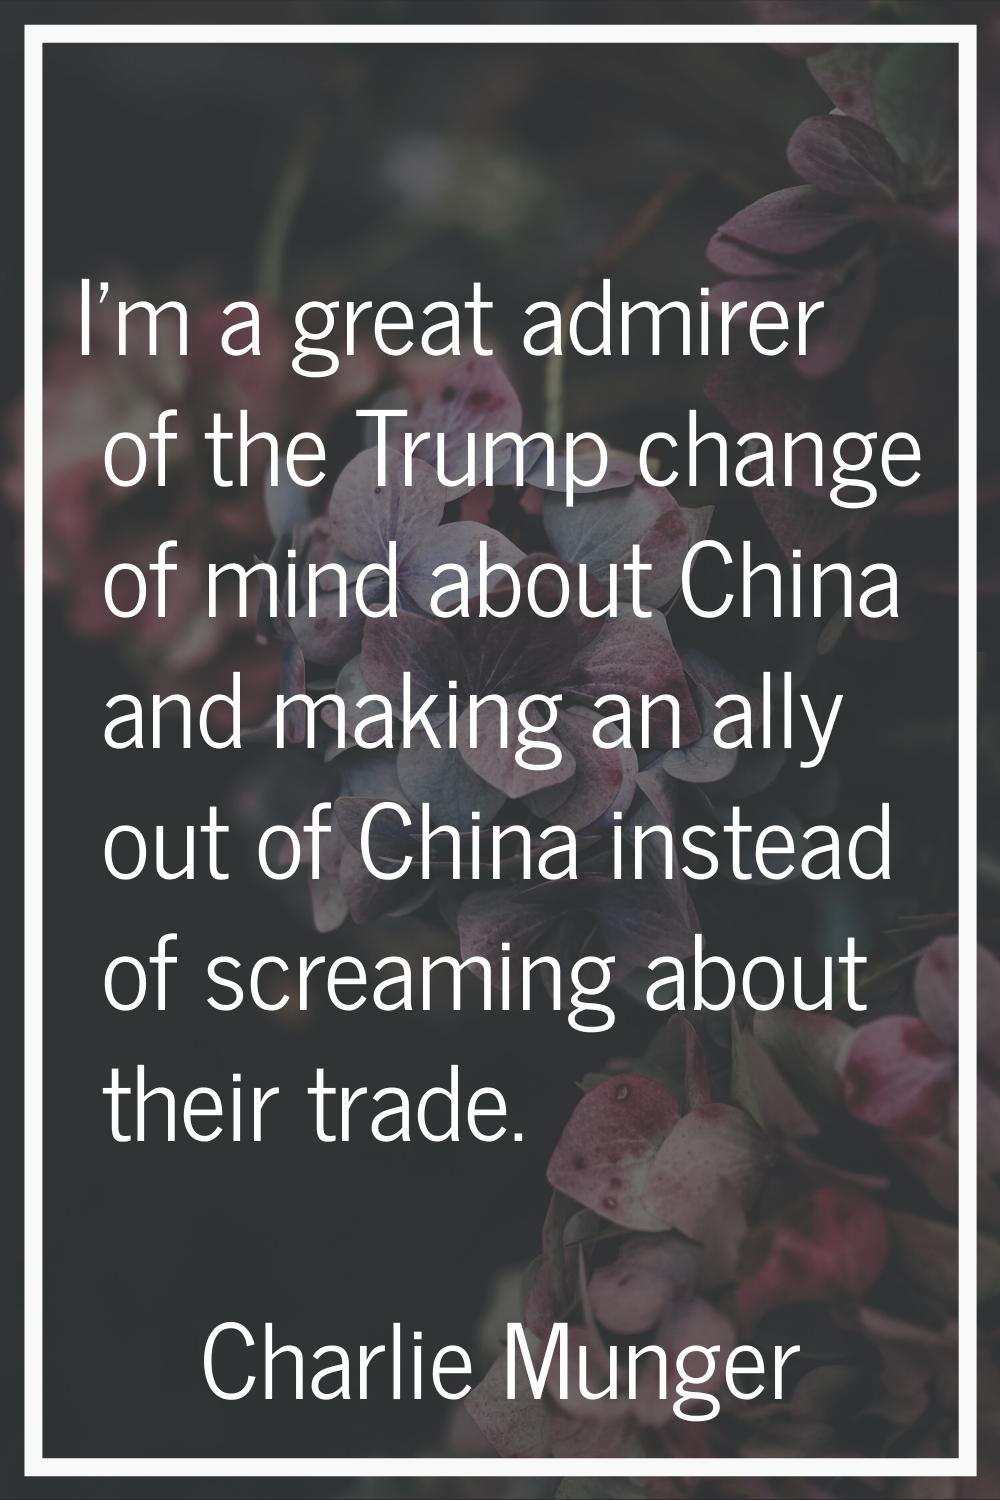 I'm a great admirer of the Trump change of mind about China and making an ally out of China instead